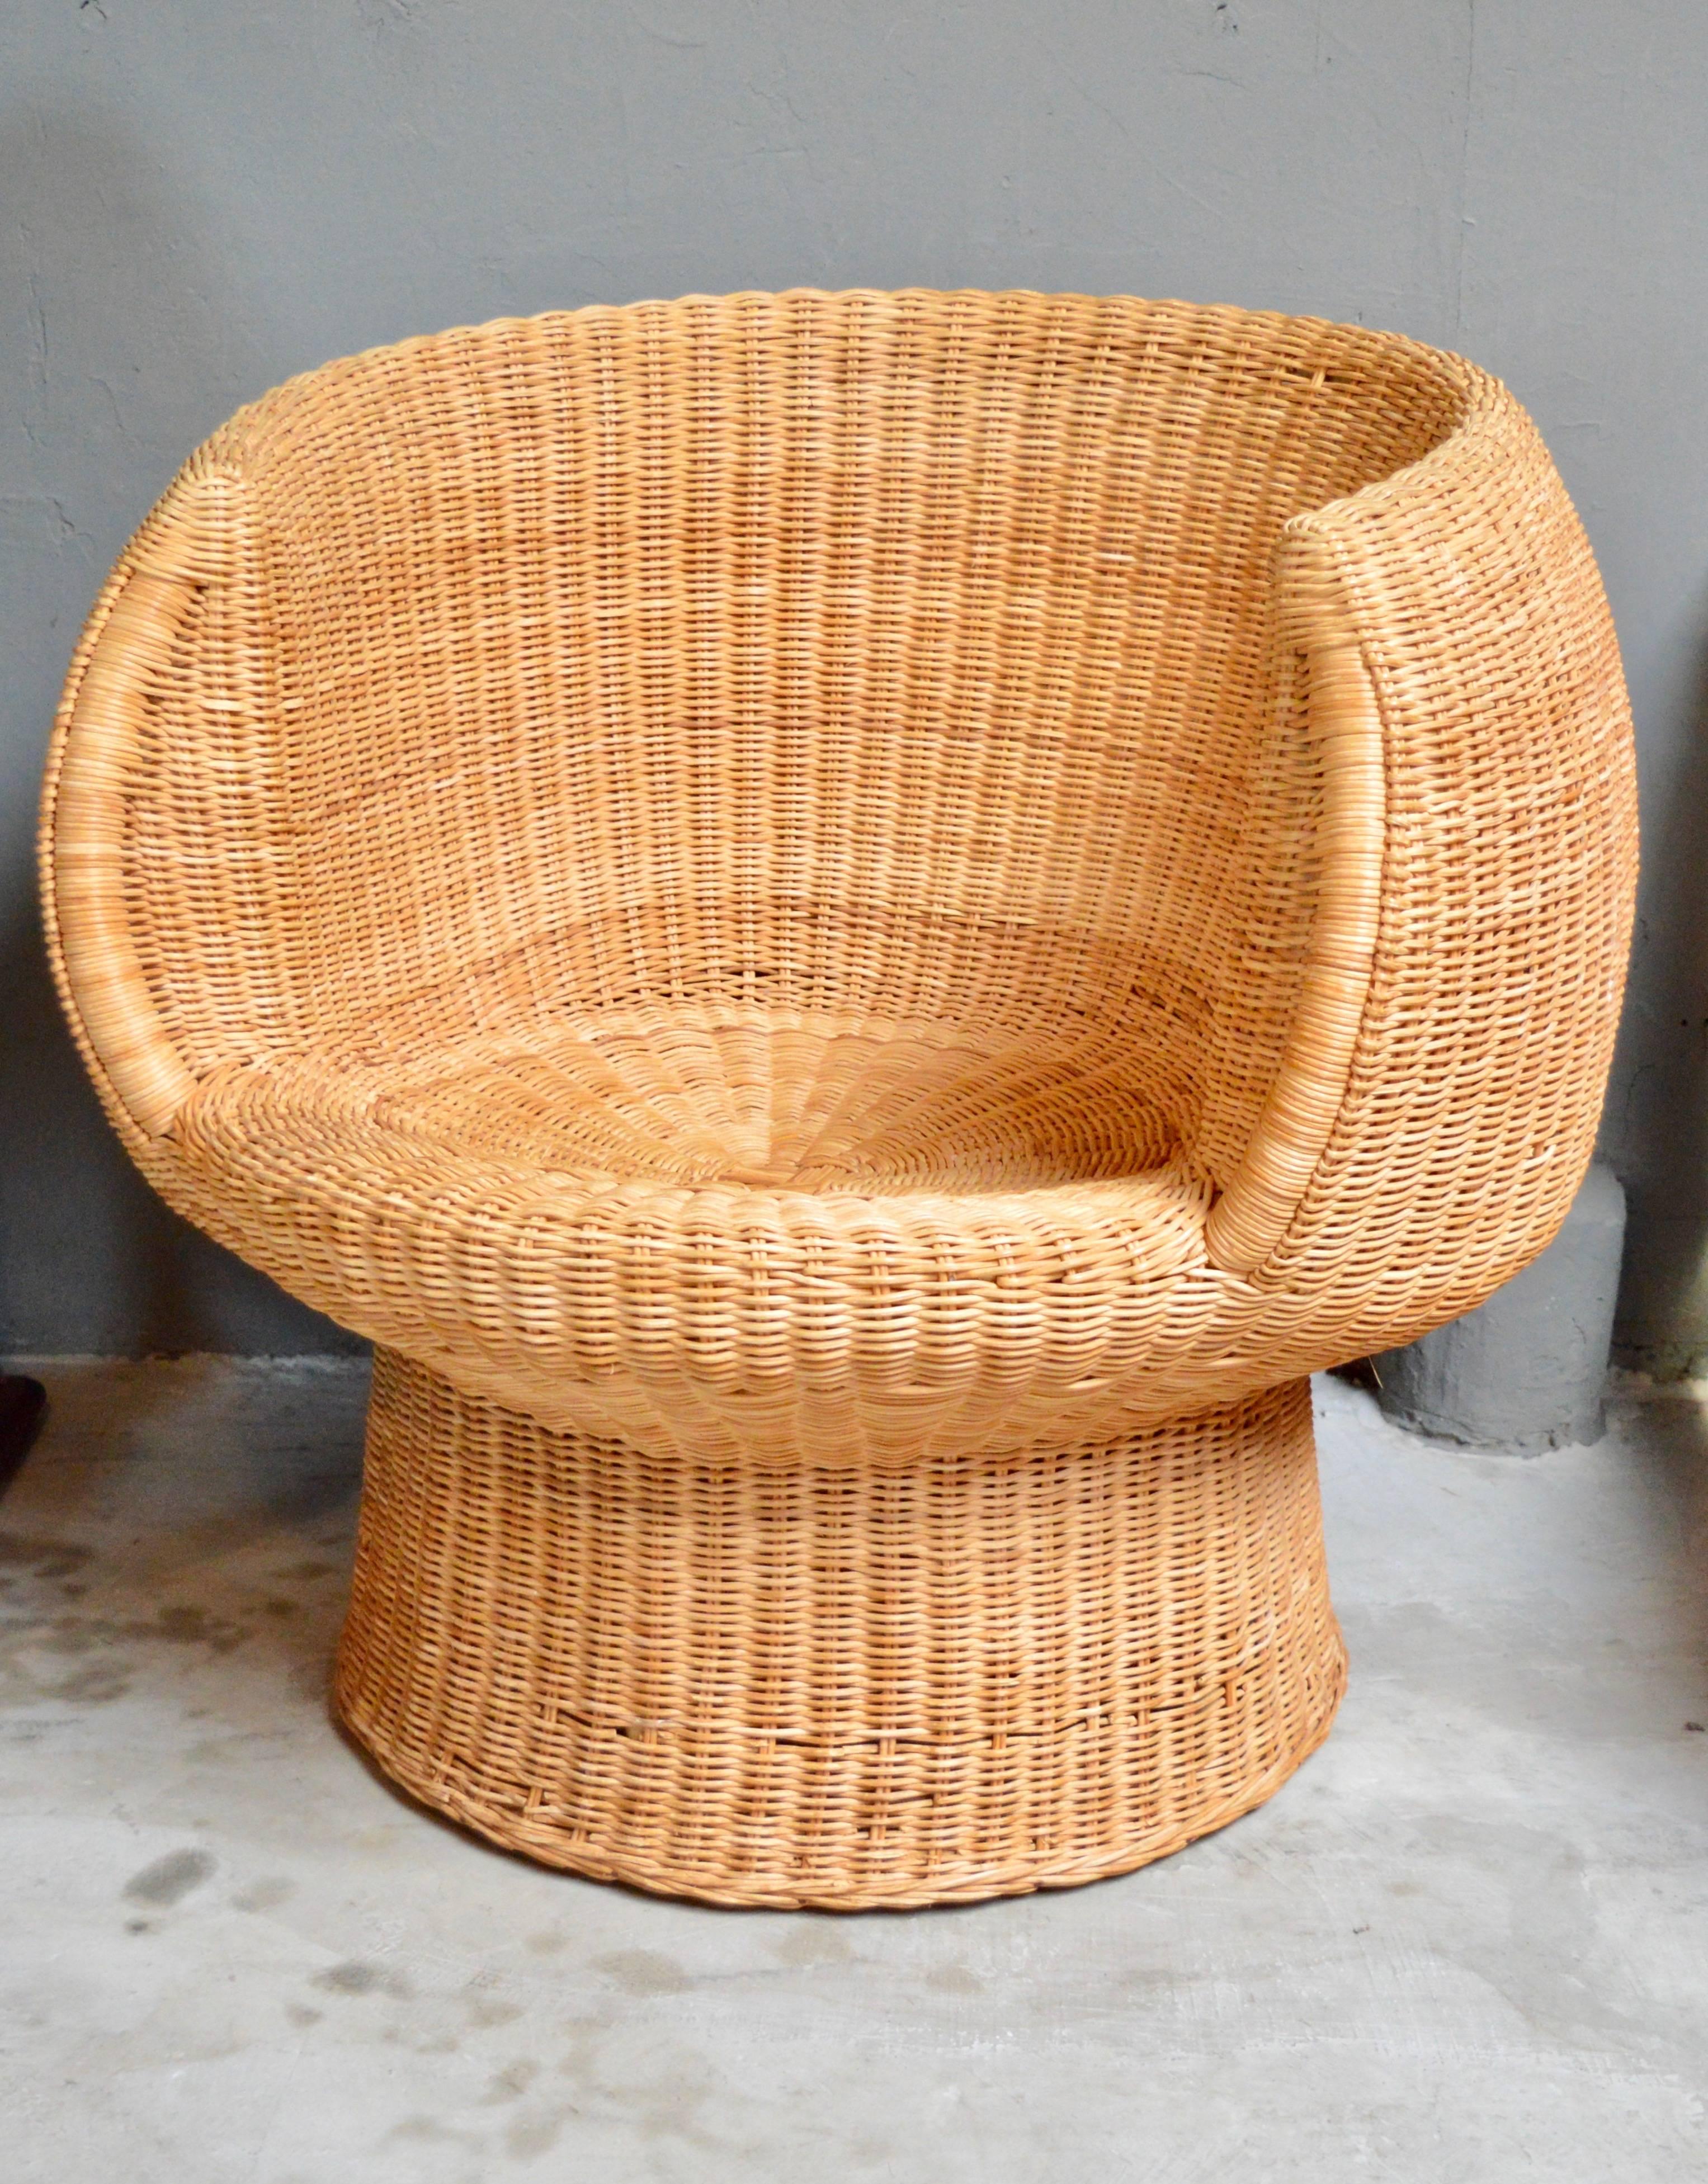 Fantastic single sculptural wicker chair. Great shape and size. Excellent vintage condition. Perfect for indoors or outside covered patio.